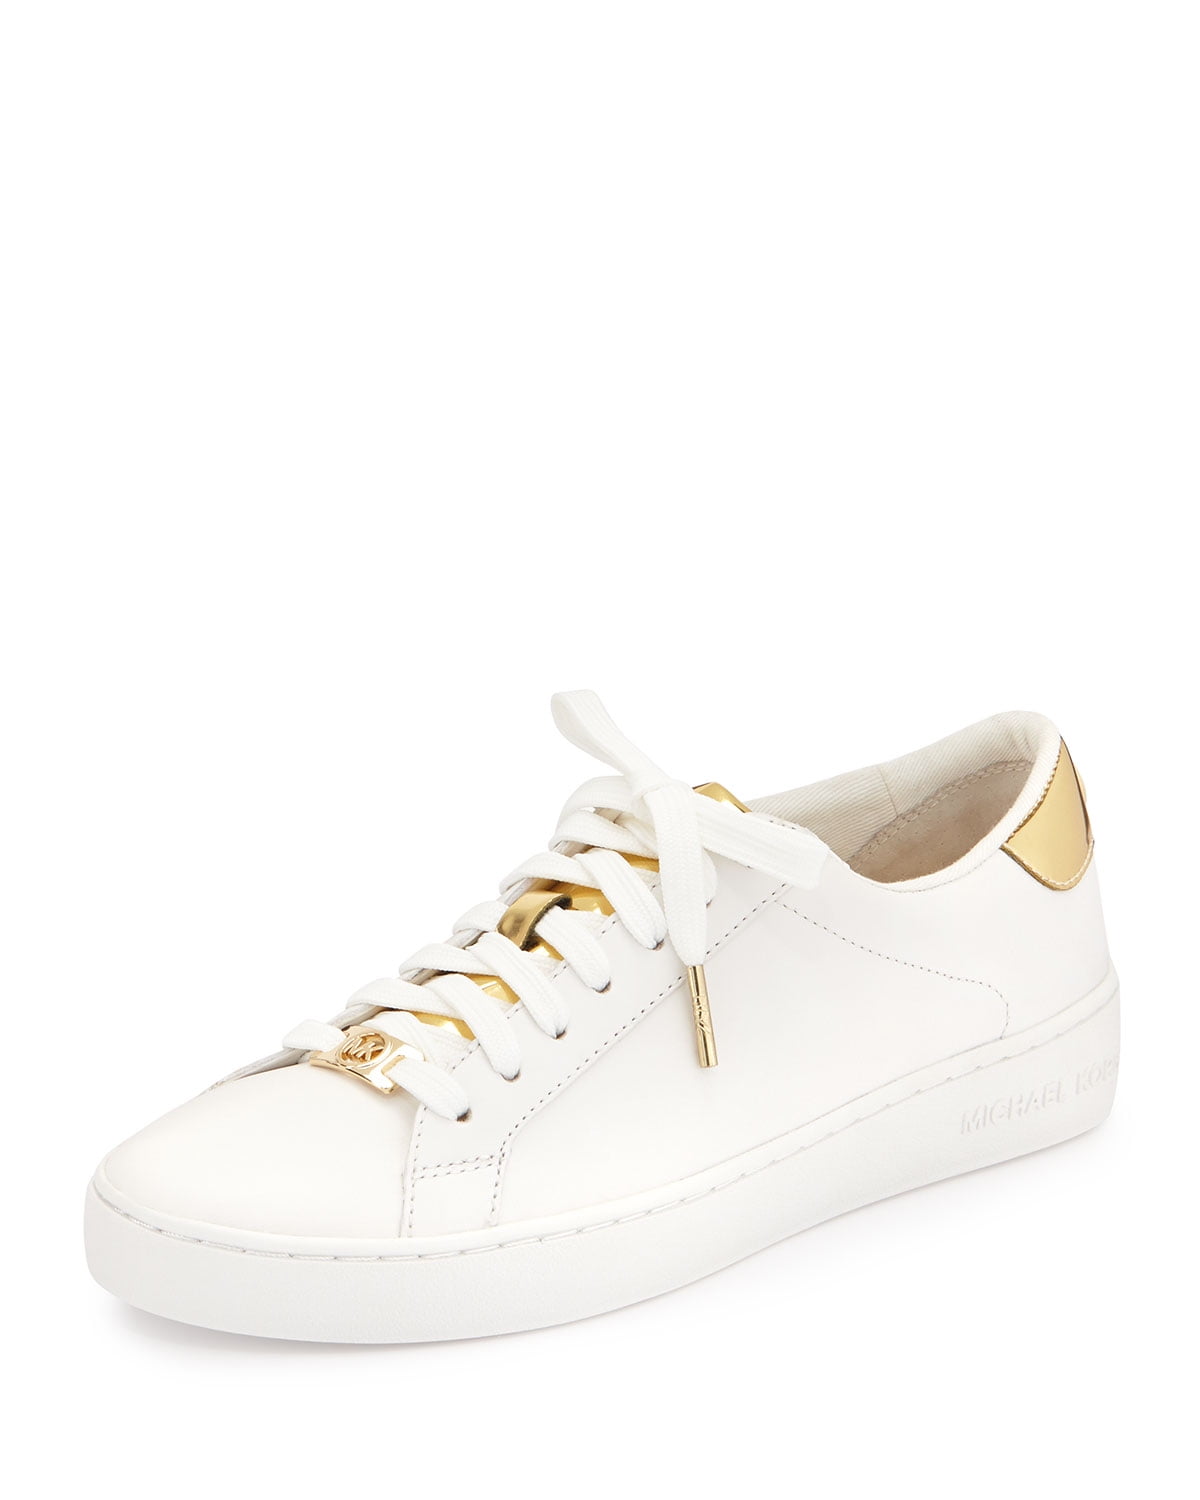 Trainers Michael Kors  Irving white leather and denim sneakers   43S9IRFS2L085